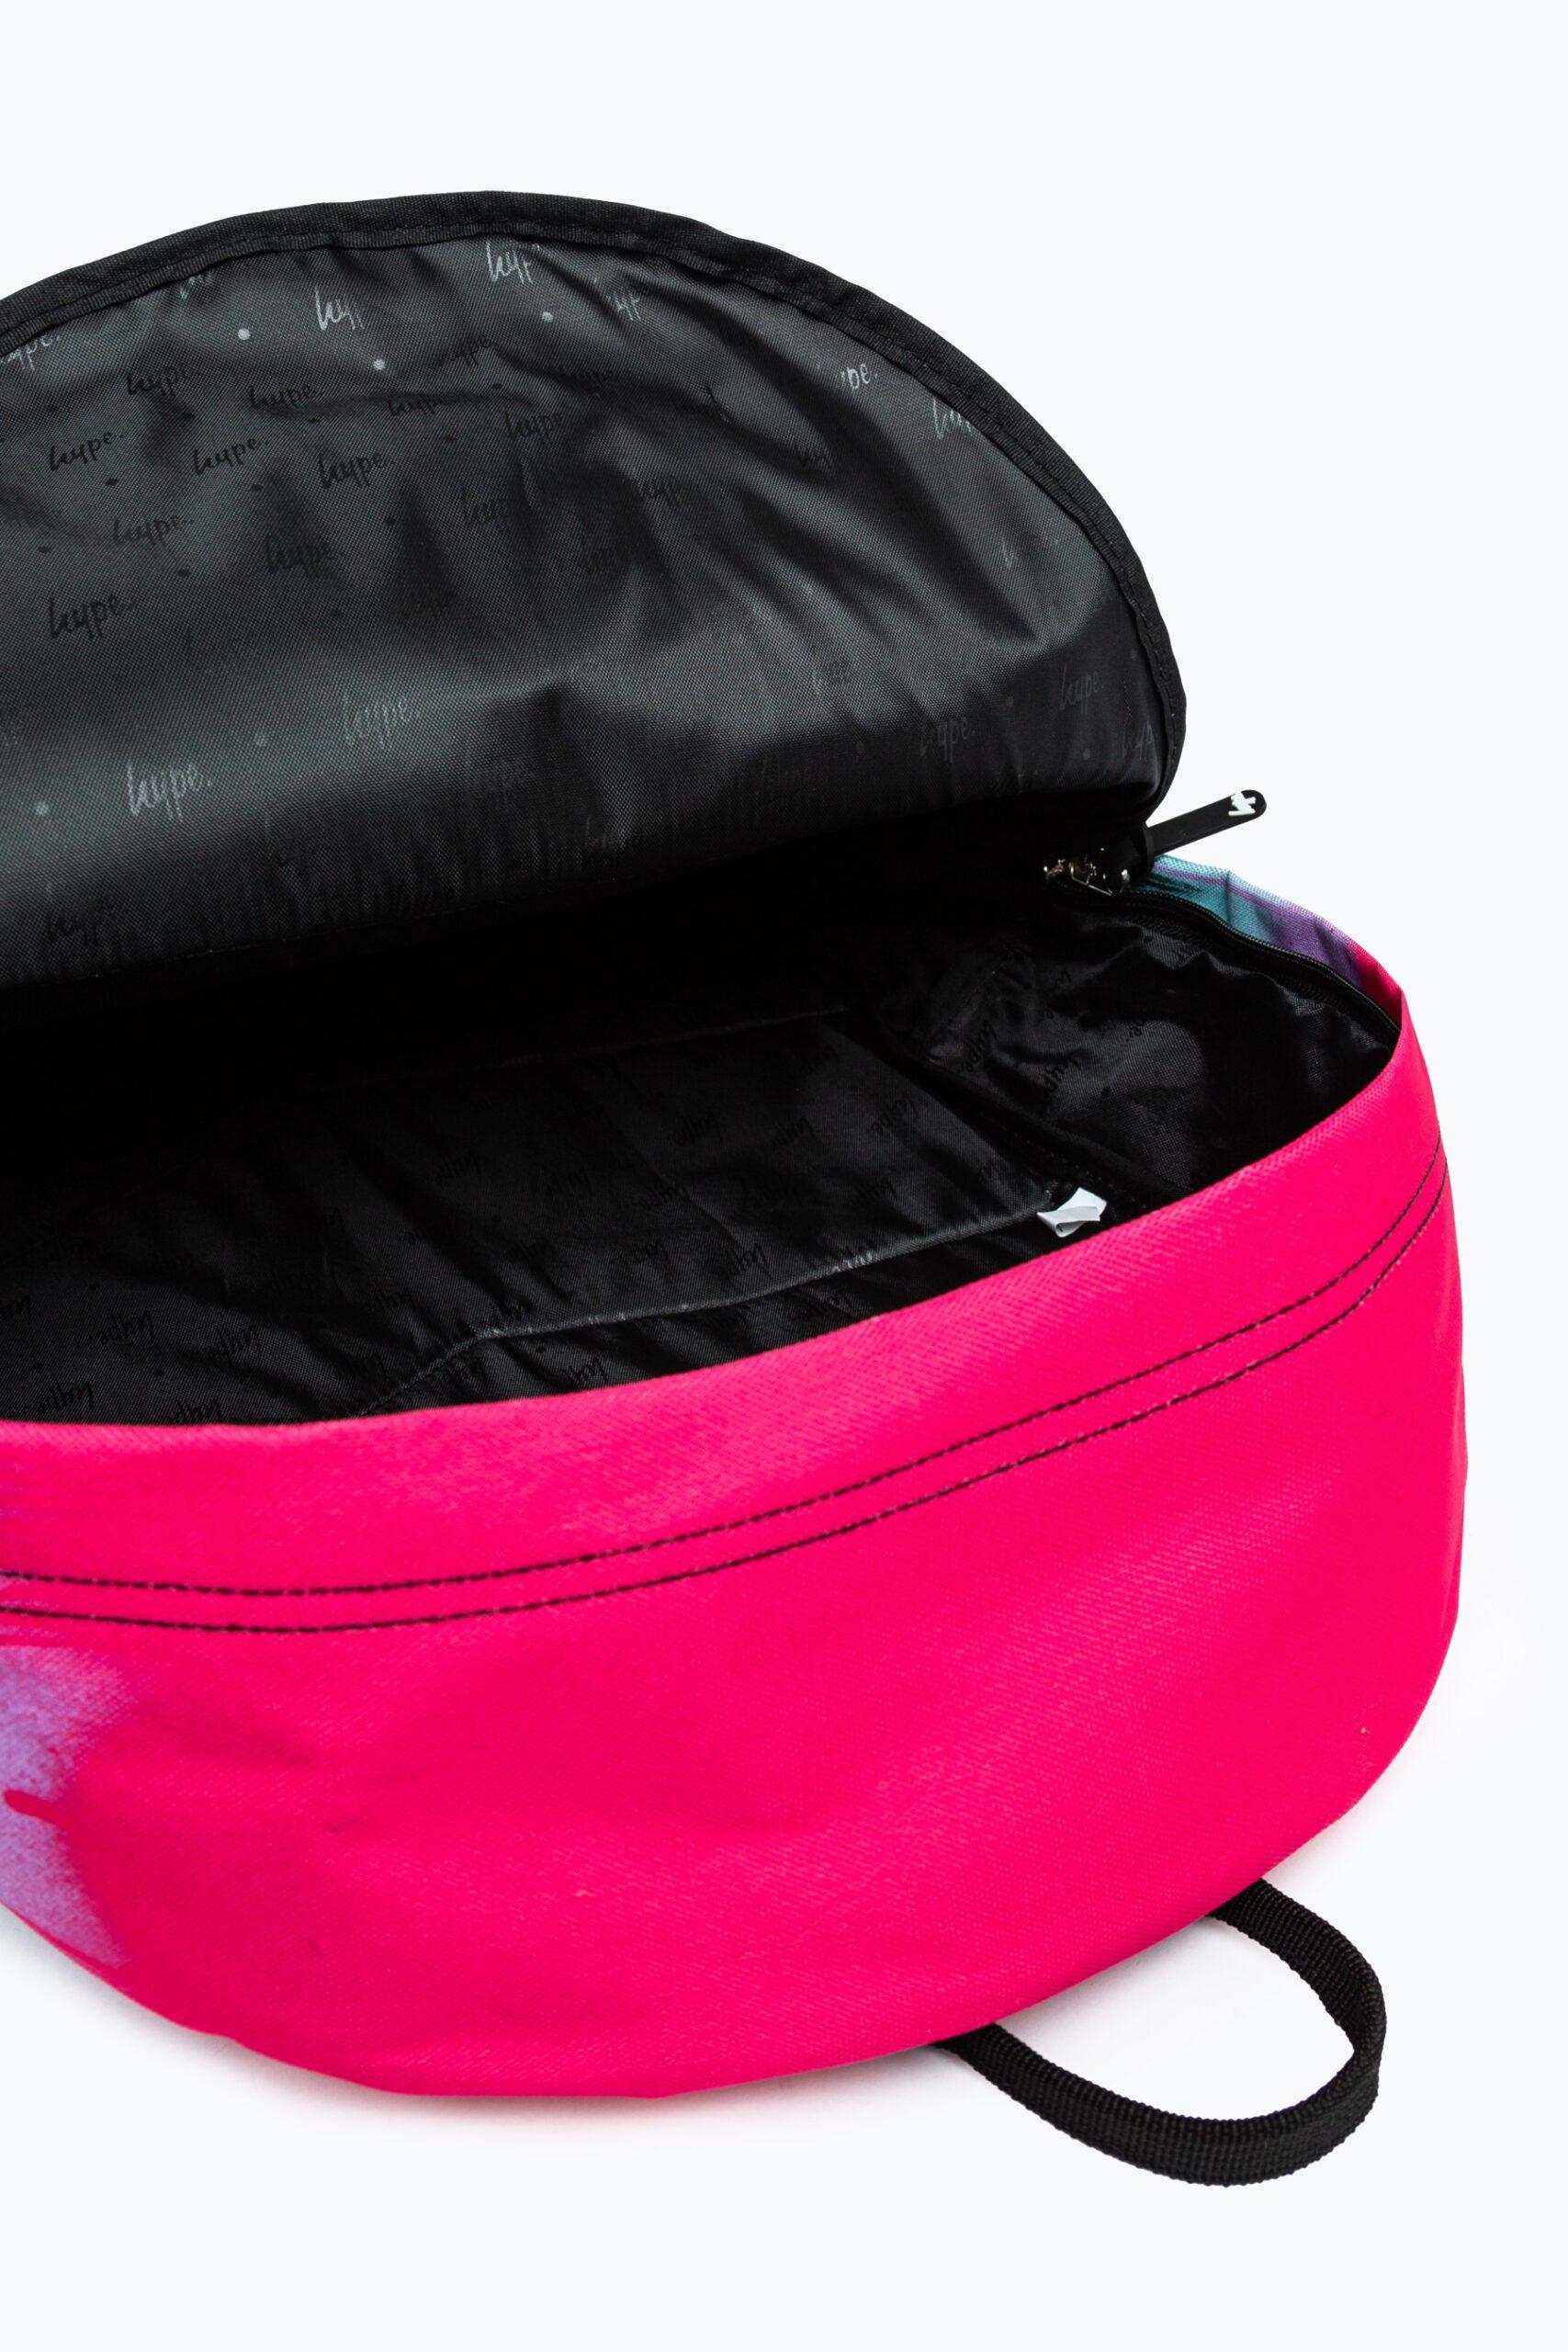 Hype pink and black paint drip backpack inside view